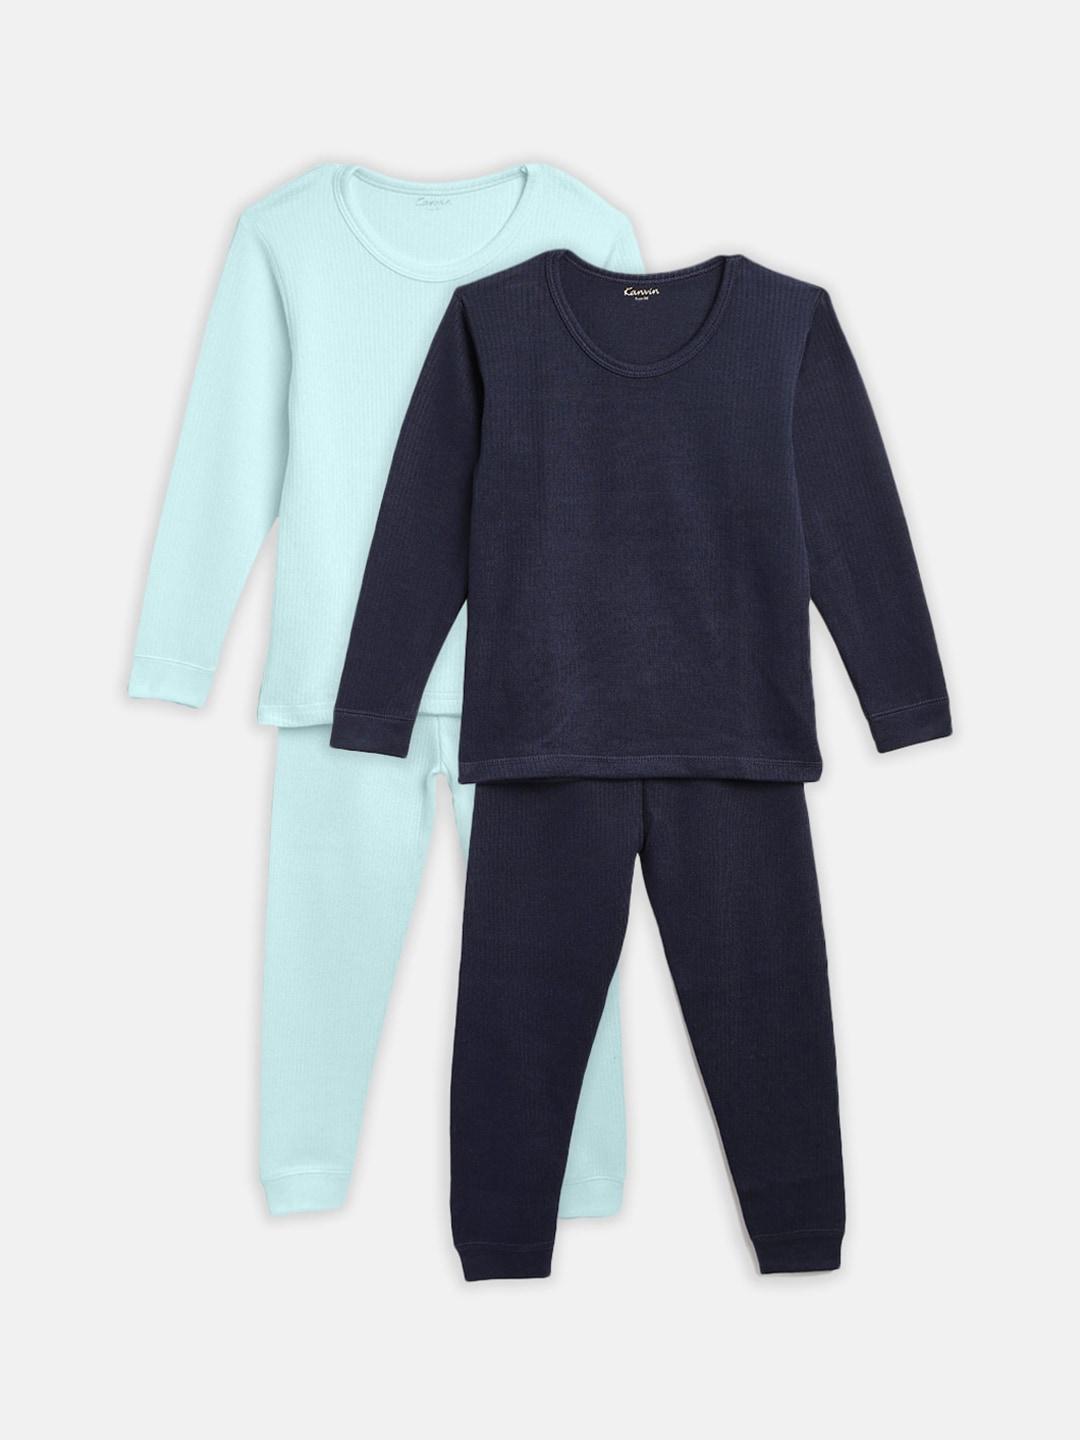 kanvin-boys-pack-of-2-turquoise-blue-&-navy-blue-solid-thermal-sets